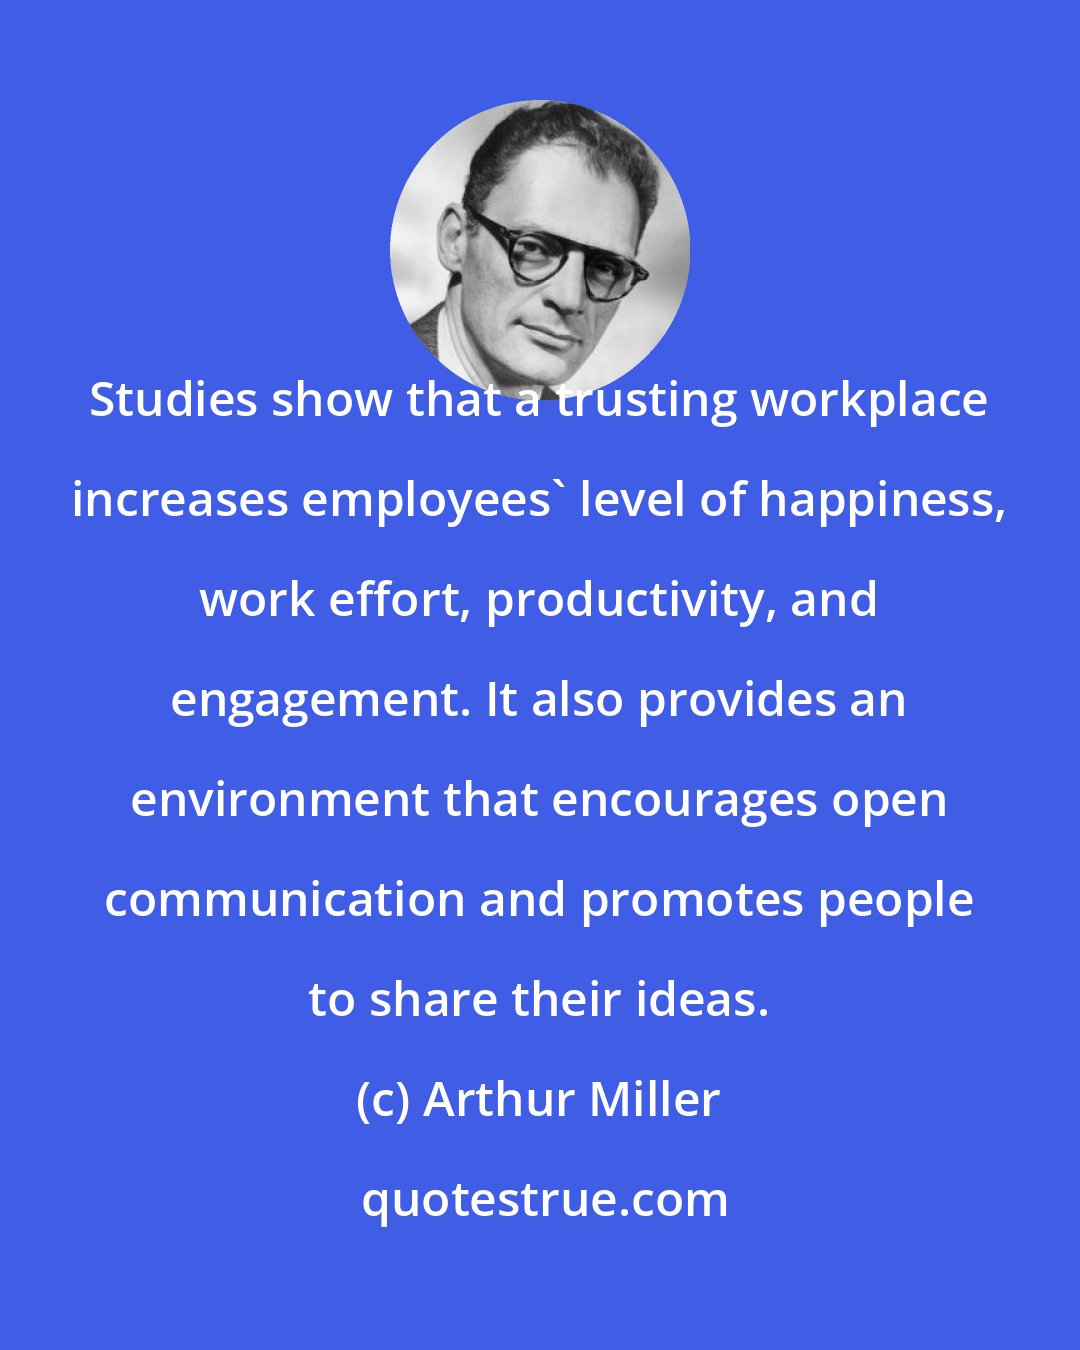 Arthur Miller: Studies show that a trusting workplace increases employees' level of happiness, work effort, productivity, and engagement. It also provides an environment that encourages open communication and promotes people to share their ideas.